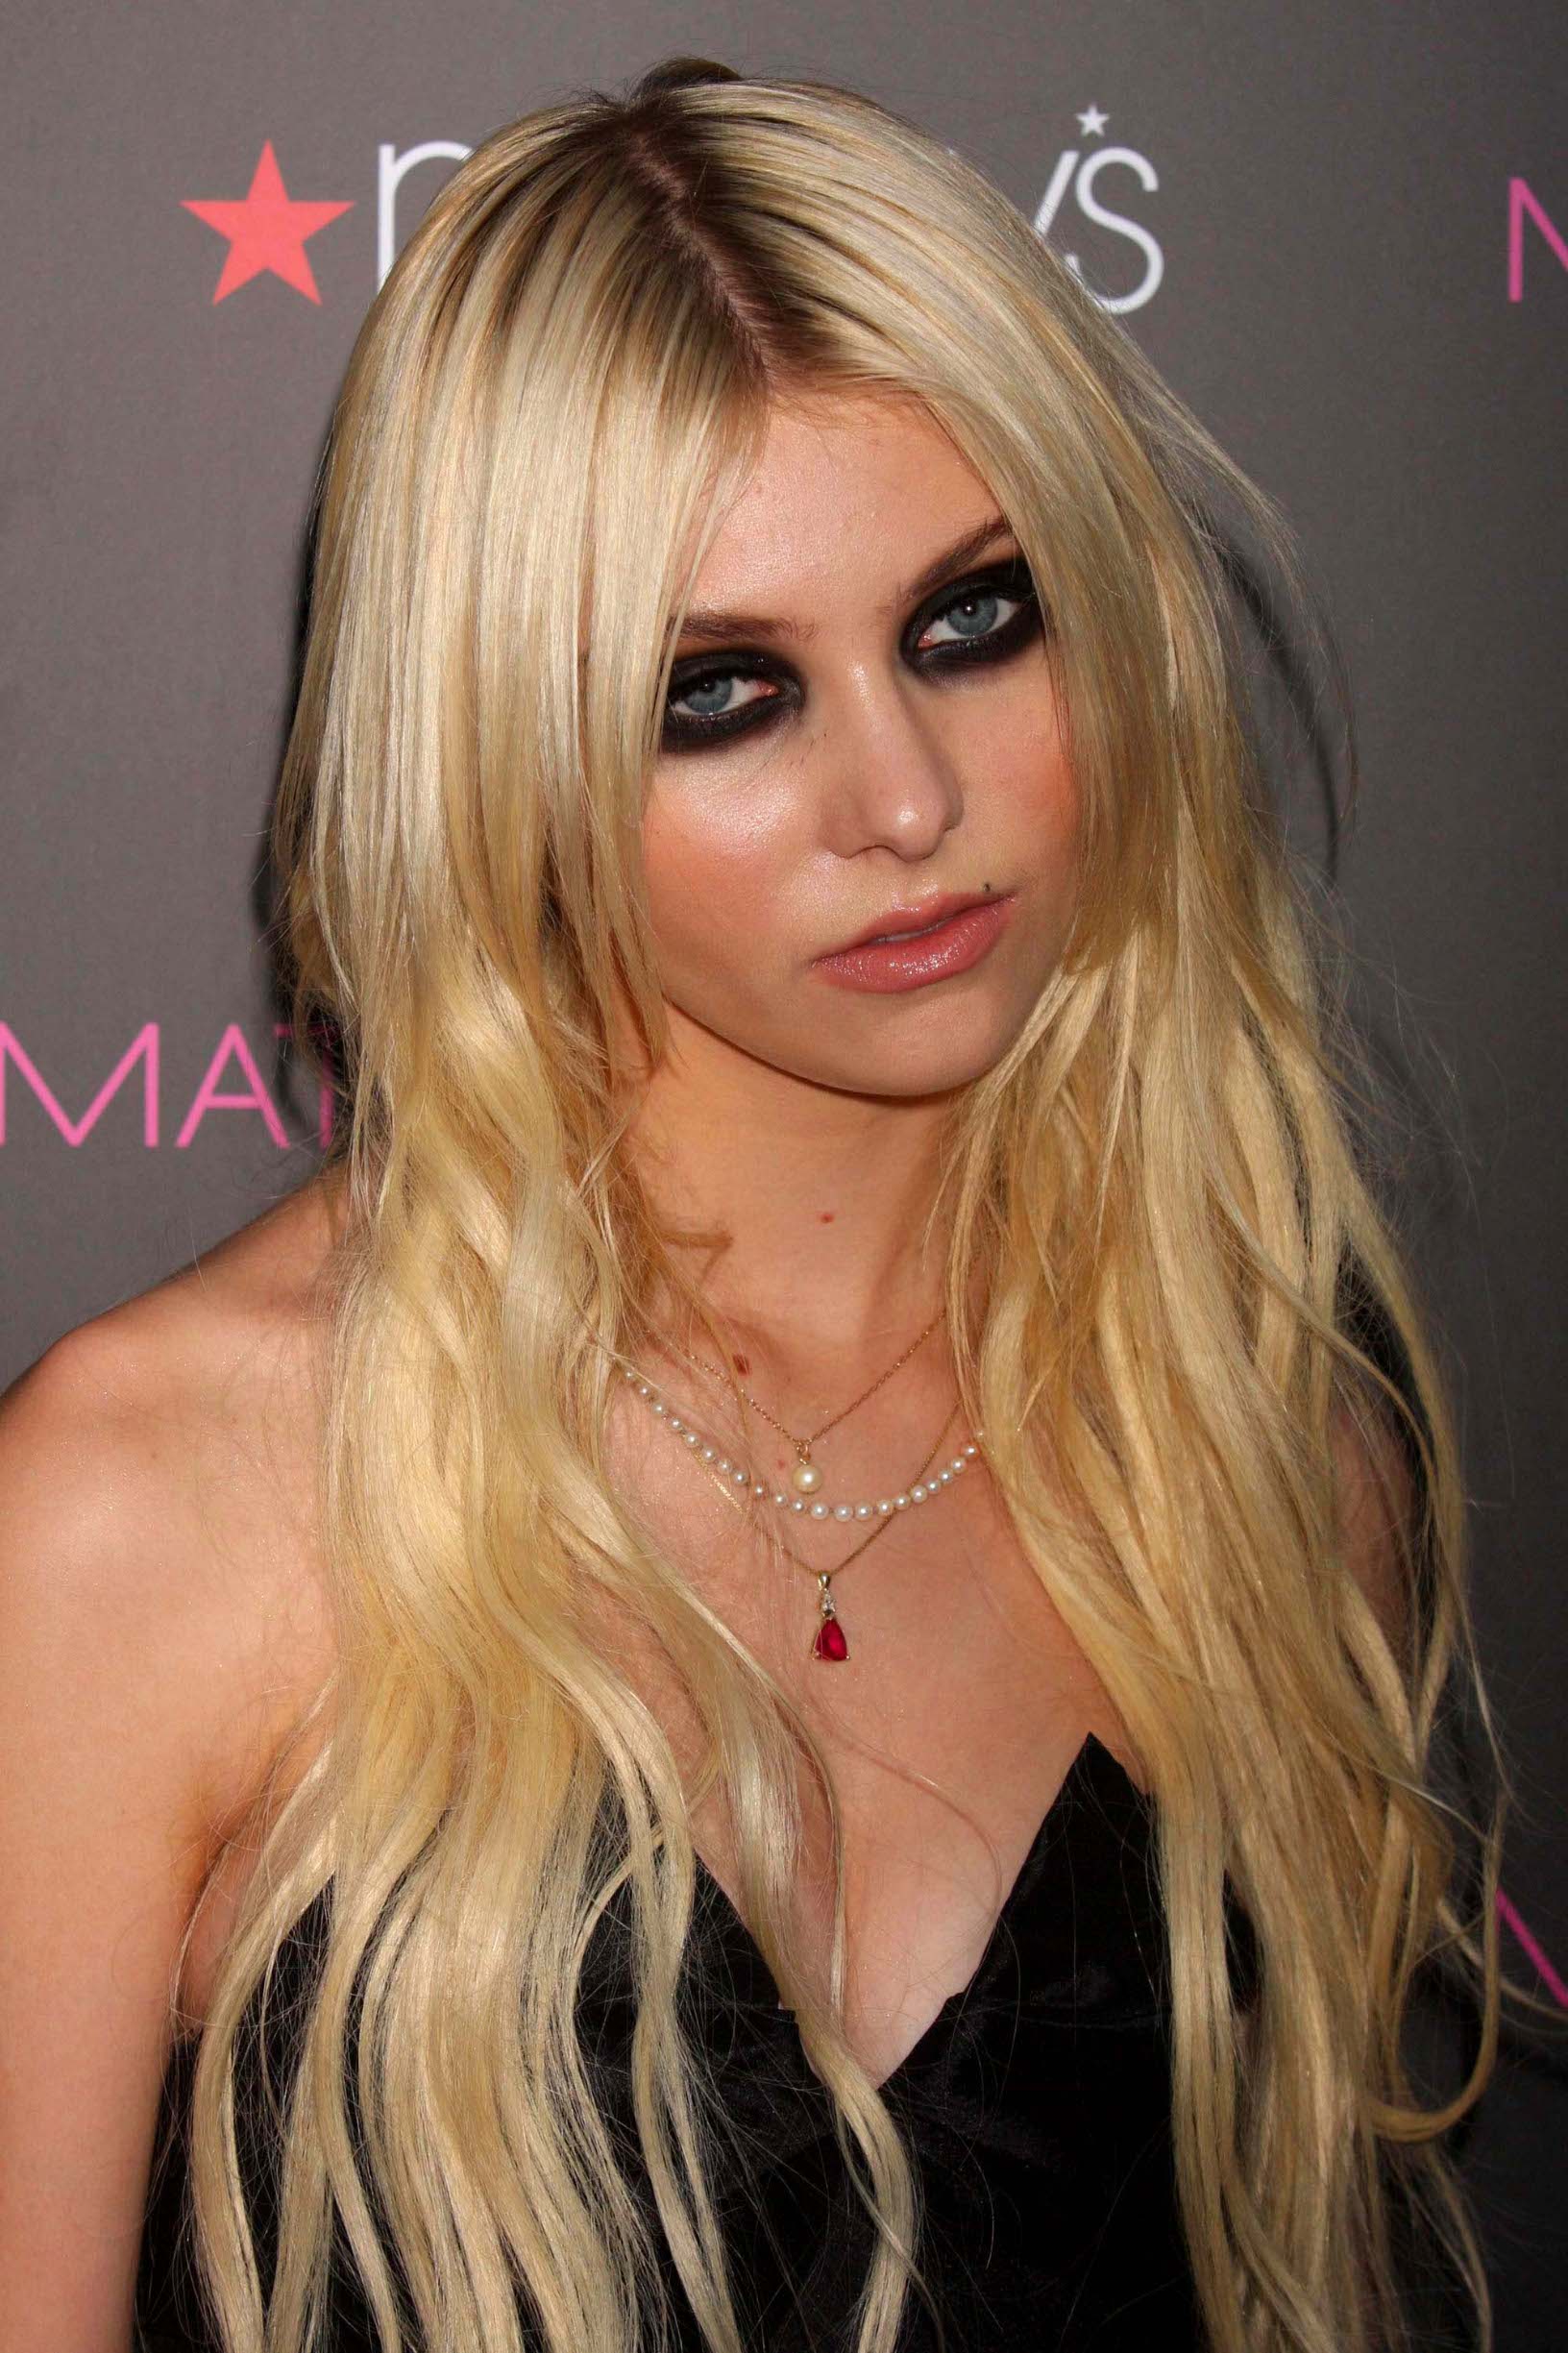 Sept. 22, 2010 - New York, New York, U.S. - TAYLOR MOMSEN arriving at the ''Material Girl'' Fashion Line Launch at Macy's Herald Square in New York City on 09-22-2010.   2010..K65973HMc, Image: 81115269, License: Rights-managed, Restrictions: , Model Release: no, Credit line: mg1 / Zuma Press / Profimedia